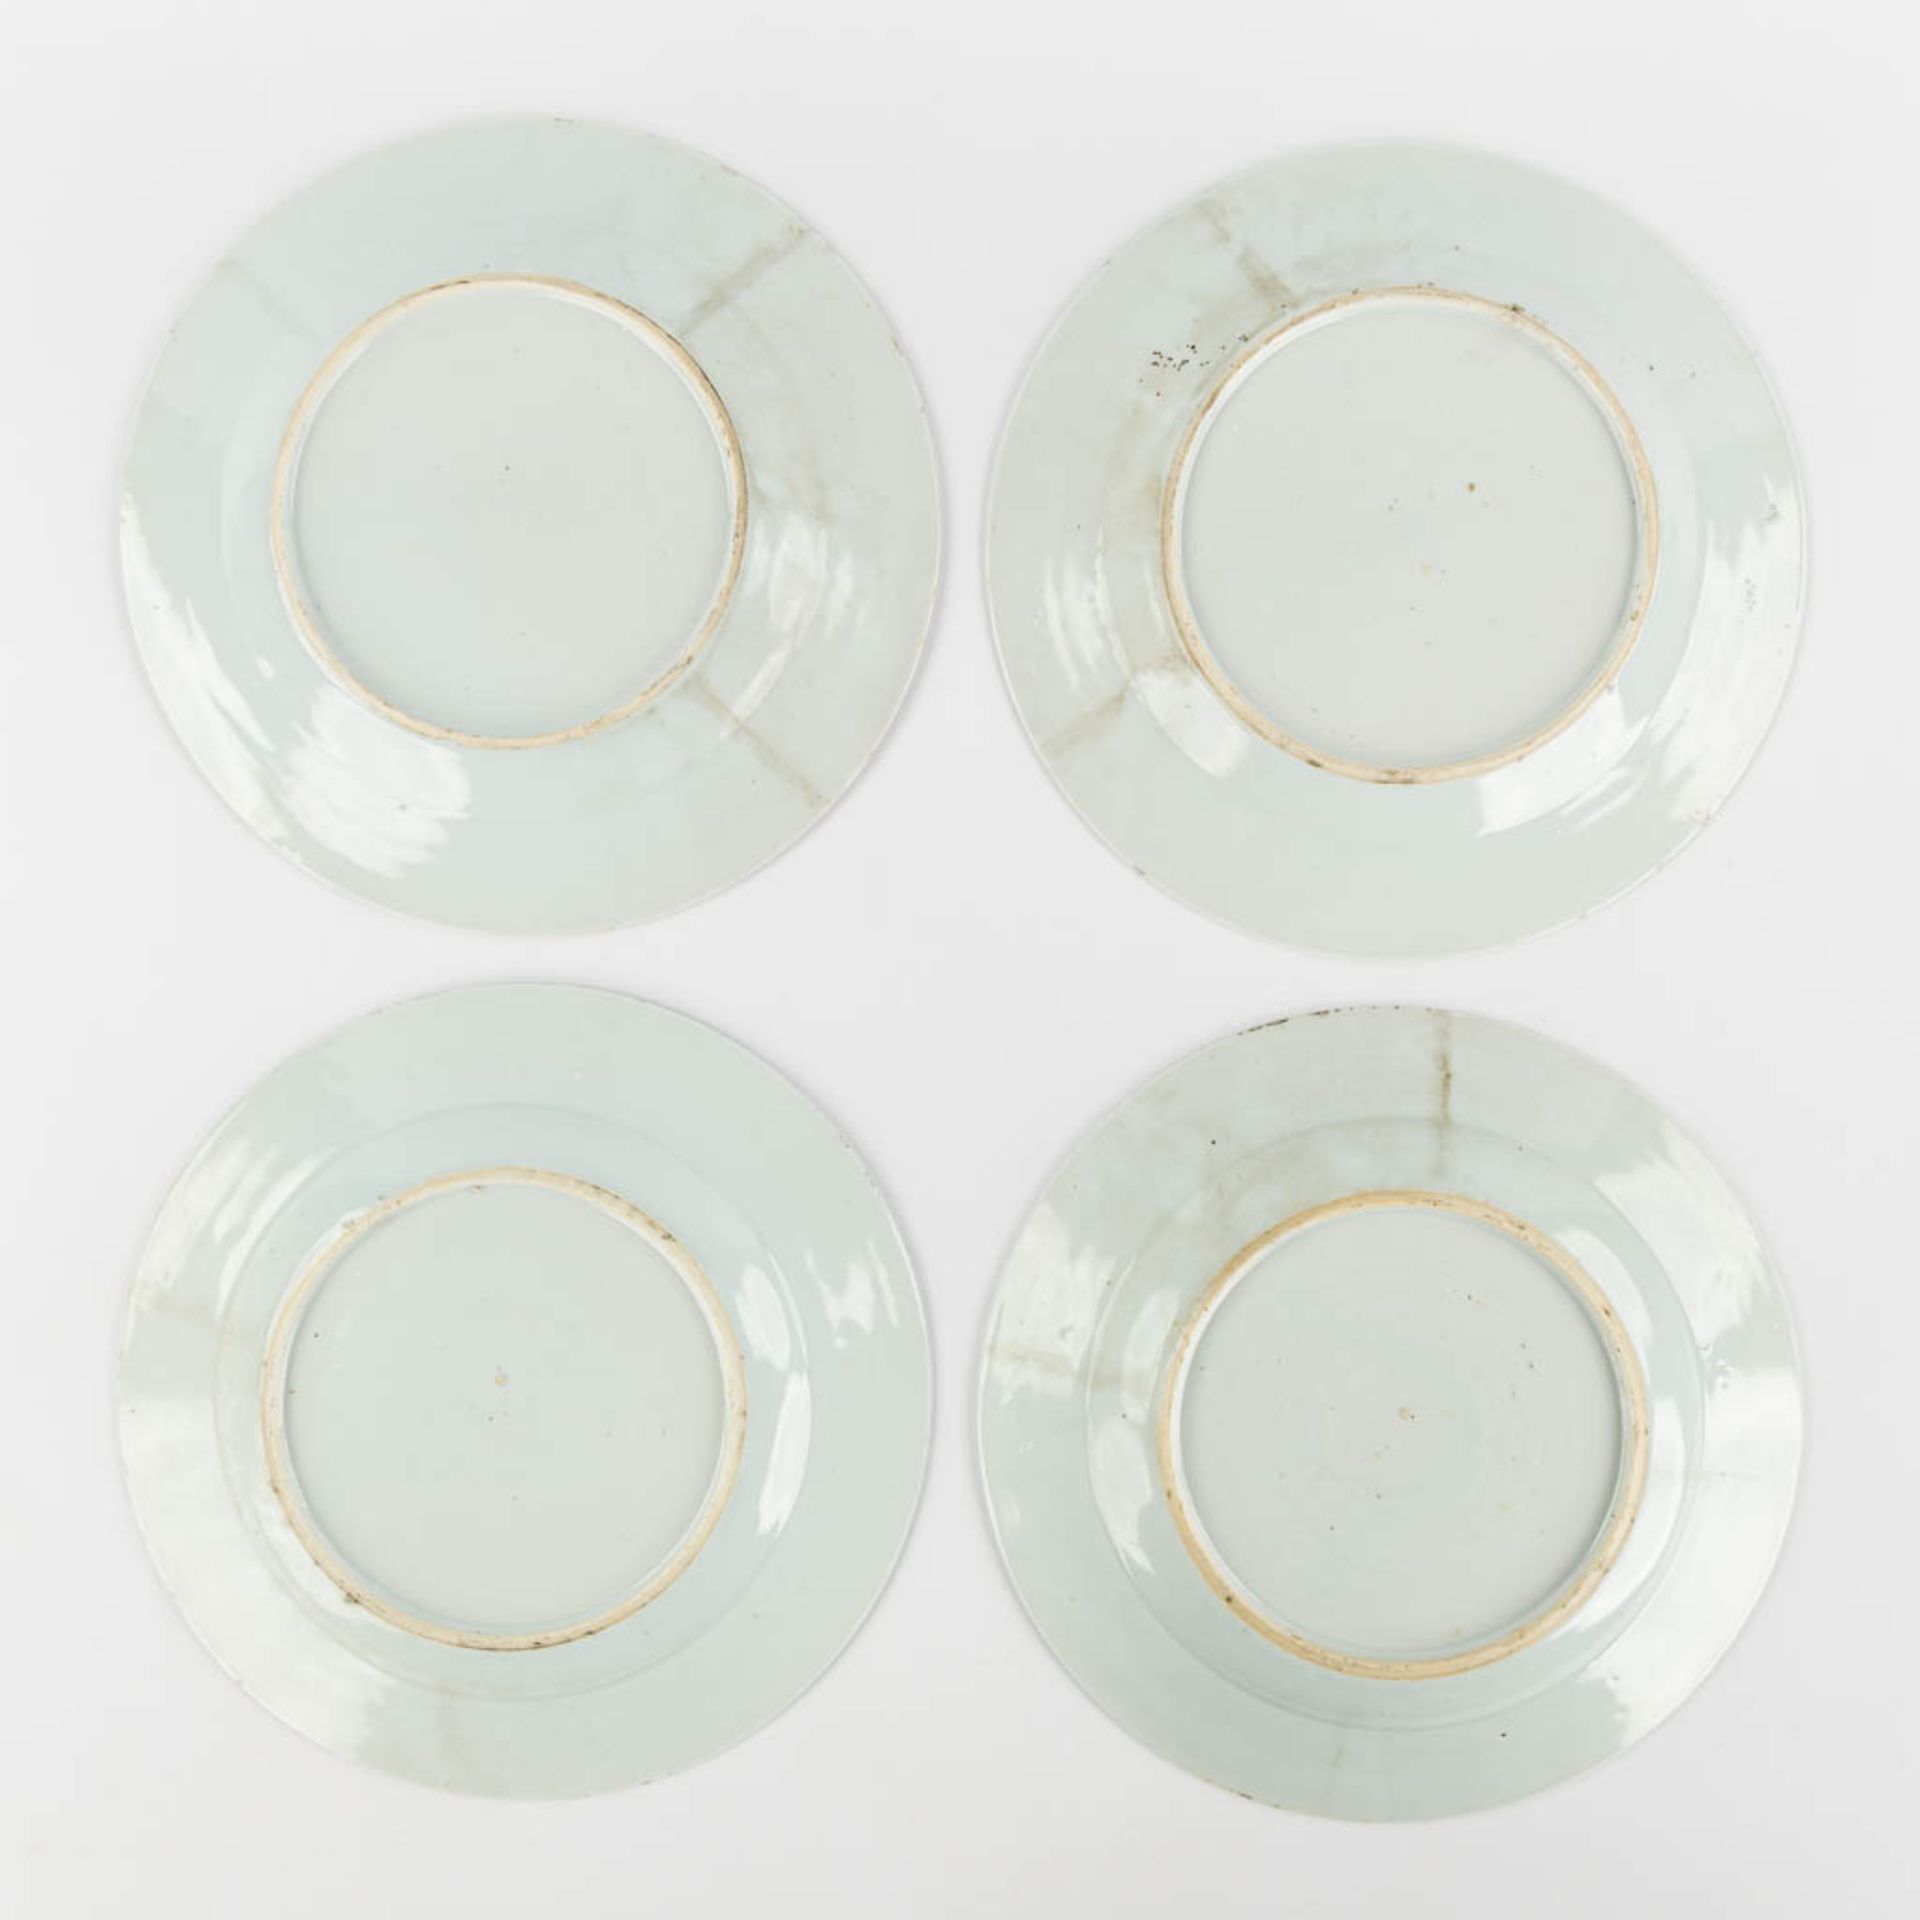 Fifteen Chinese cups, saucers and plates, blue white and Famille Roze. (D:23,4 cm) - Image 4 of 15